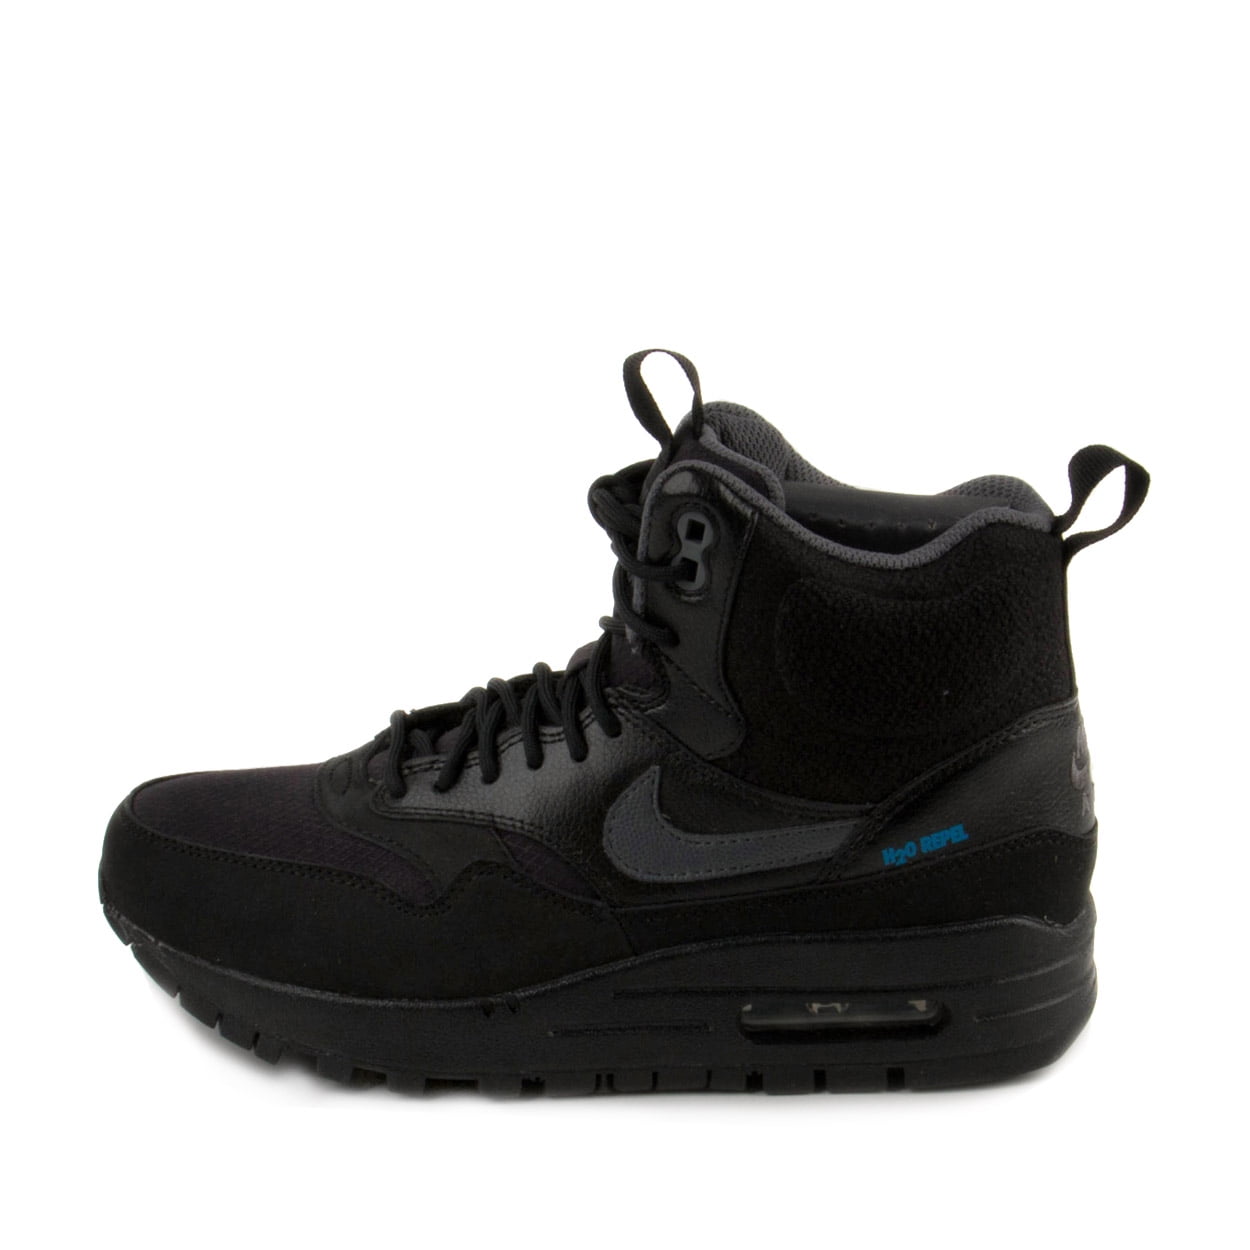 Nike Max 1 Mid Sneakerboot Shoes Size -